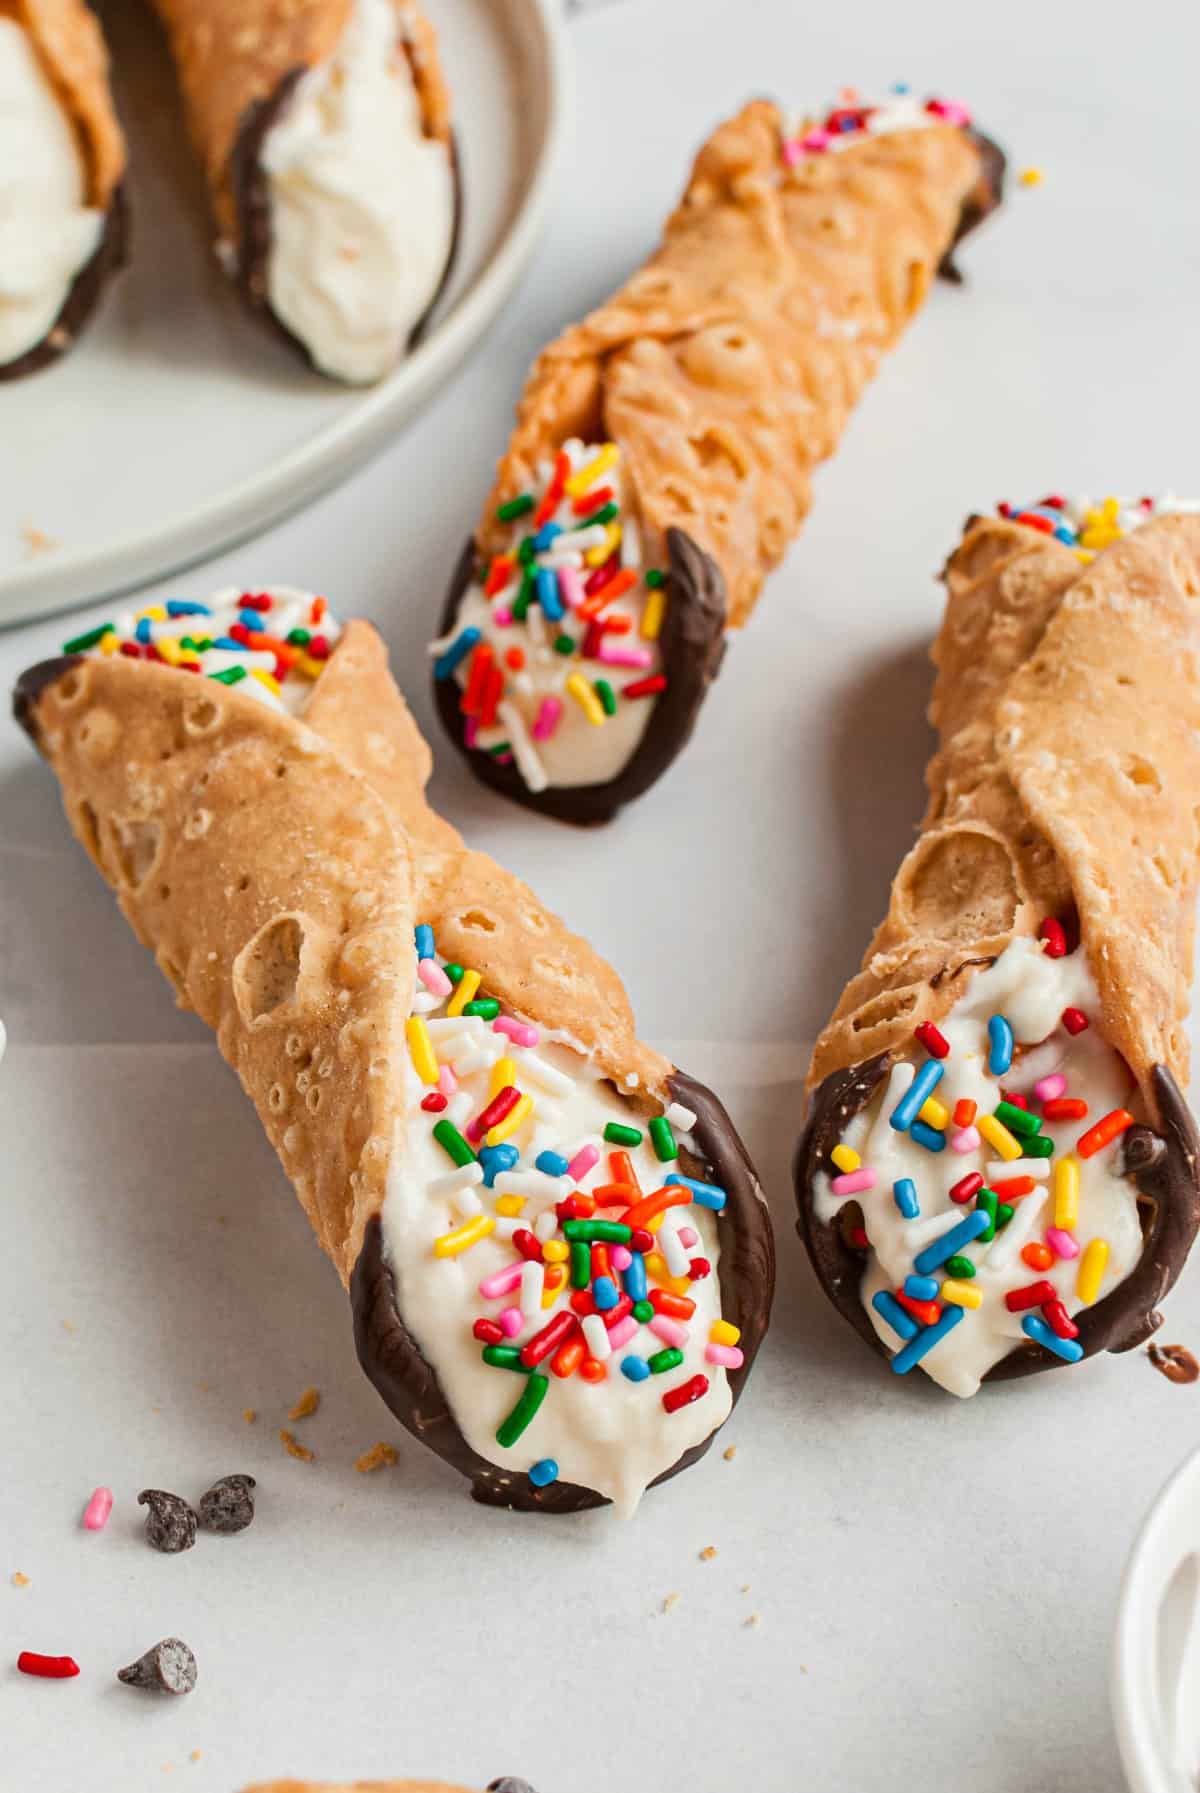 Three cannolis dipped in chocolate and topped with sprinkles.